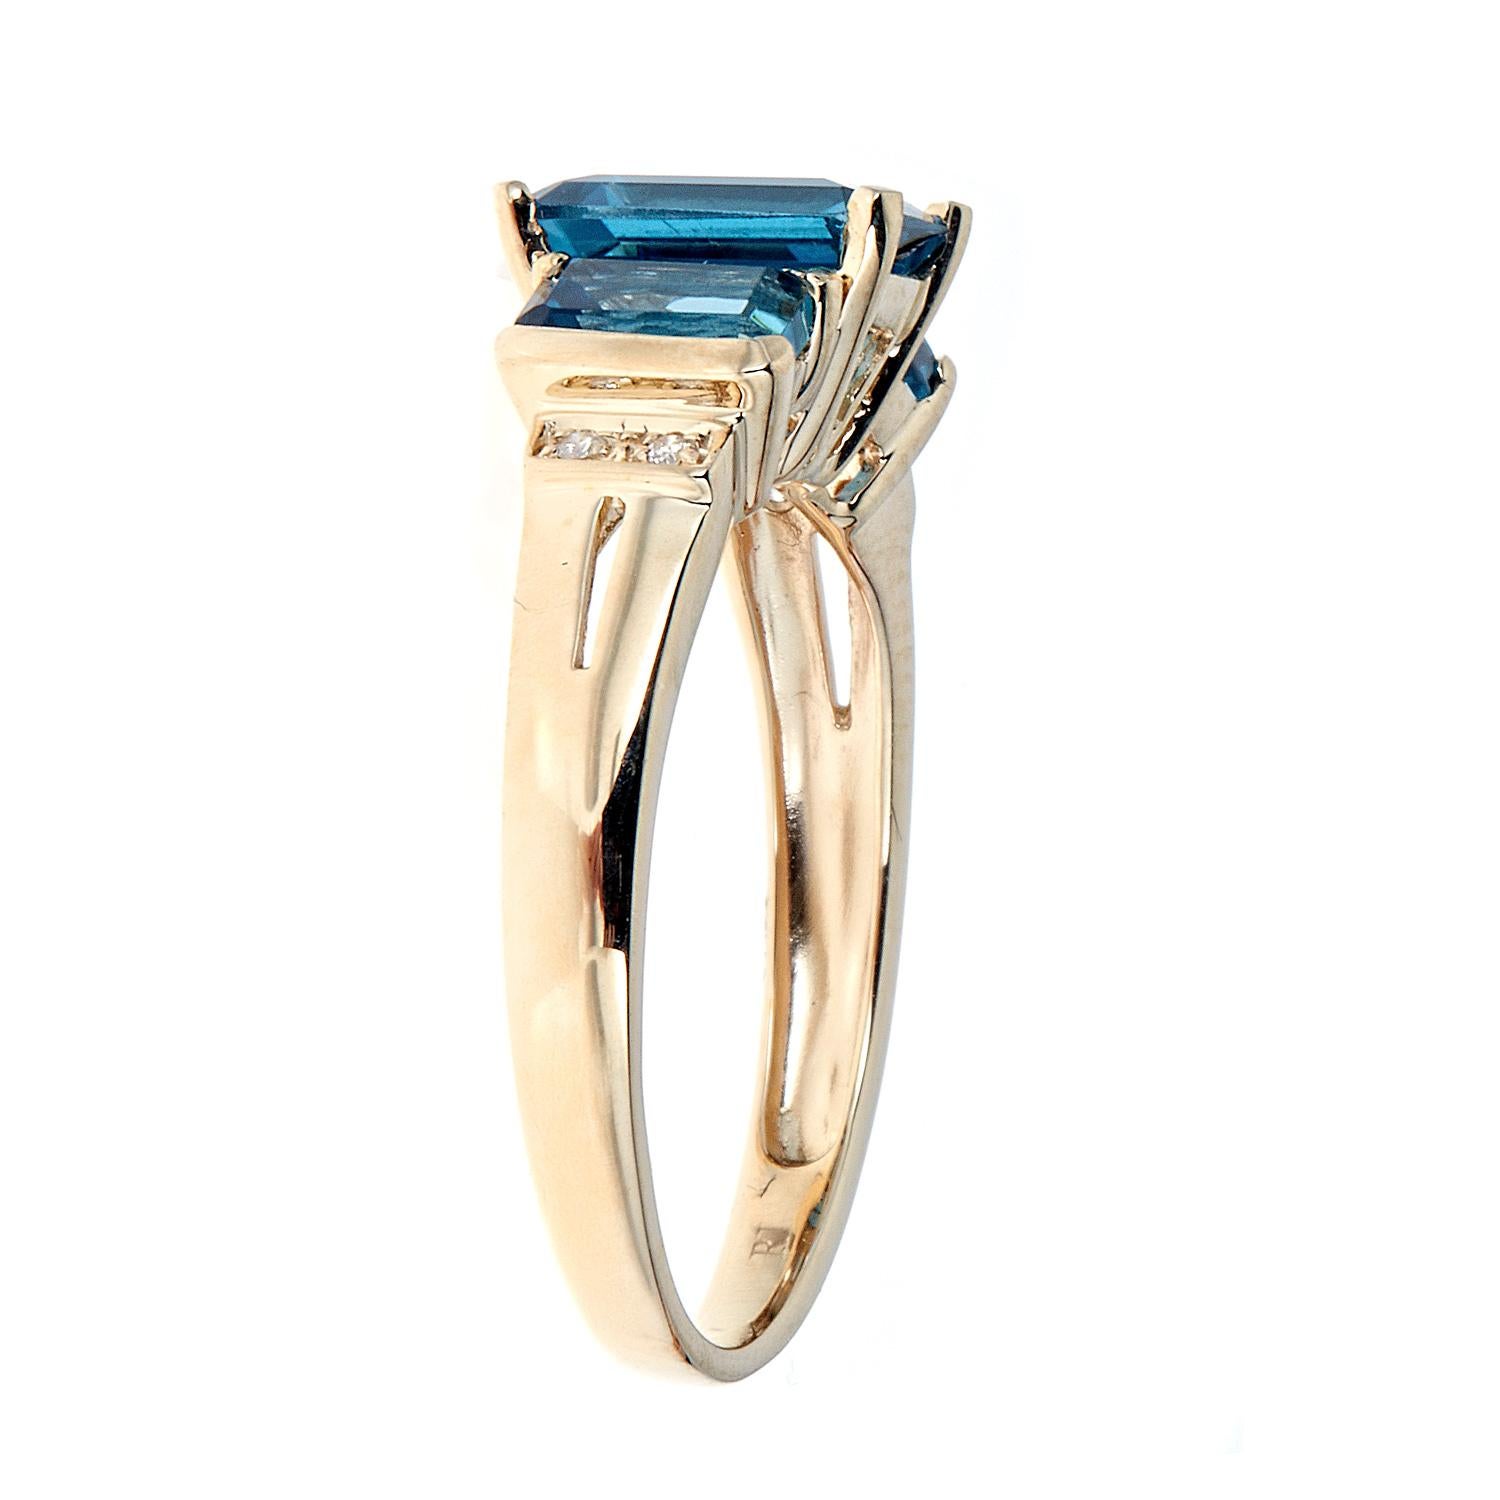 Stunning, timeless and classy eternity Unique Ring. Decorate yourself in luxury with this Gin & Grace Ring. The 10K Yellow Gold jewelry boasts Free Size (1 pcs) 2.03 carat Emerald-Cut, 6x4 mm (2 Pcs) 1.62 carat Emerald-cut Prong Setting London Blue